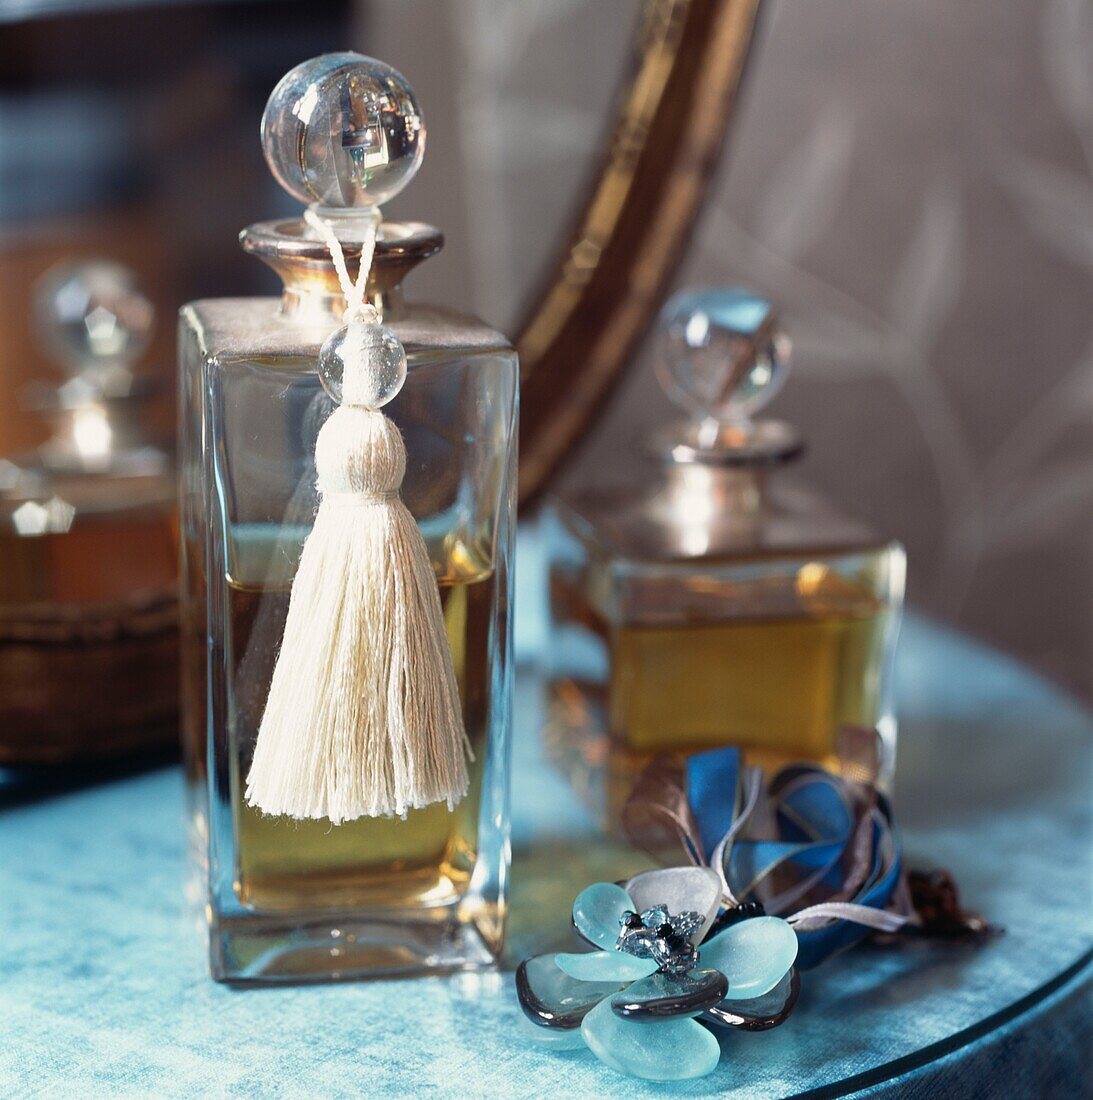 Vintage style perfume bottle on a dressing table